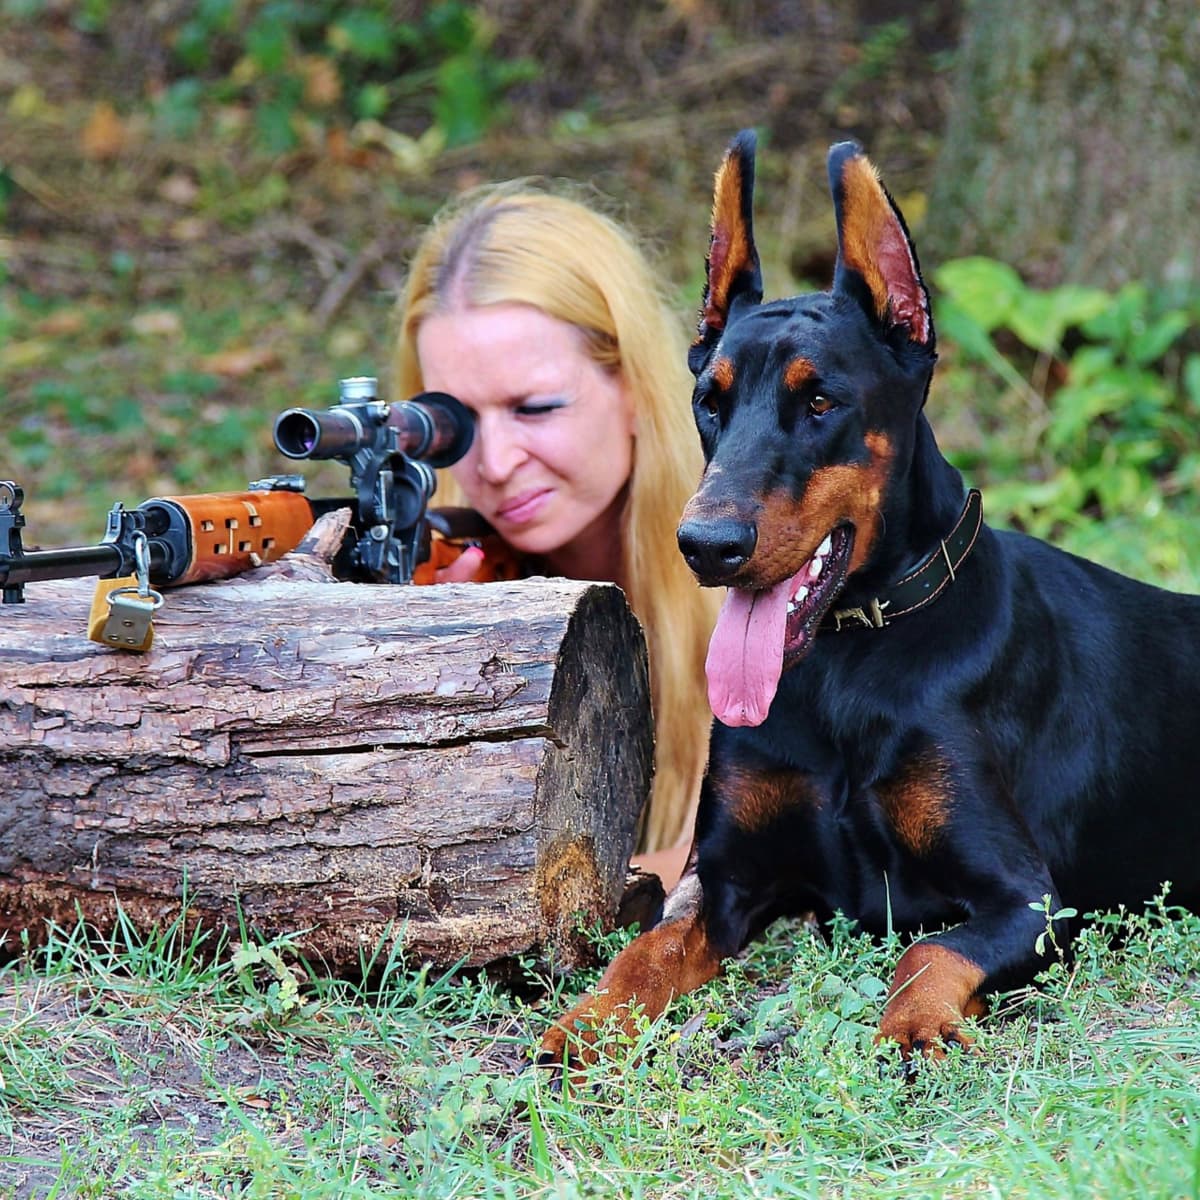 funny pictures of dogs with guns